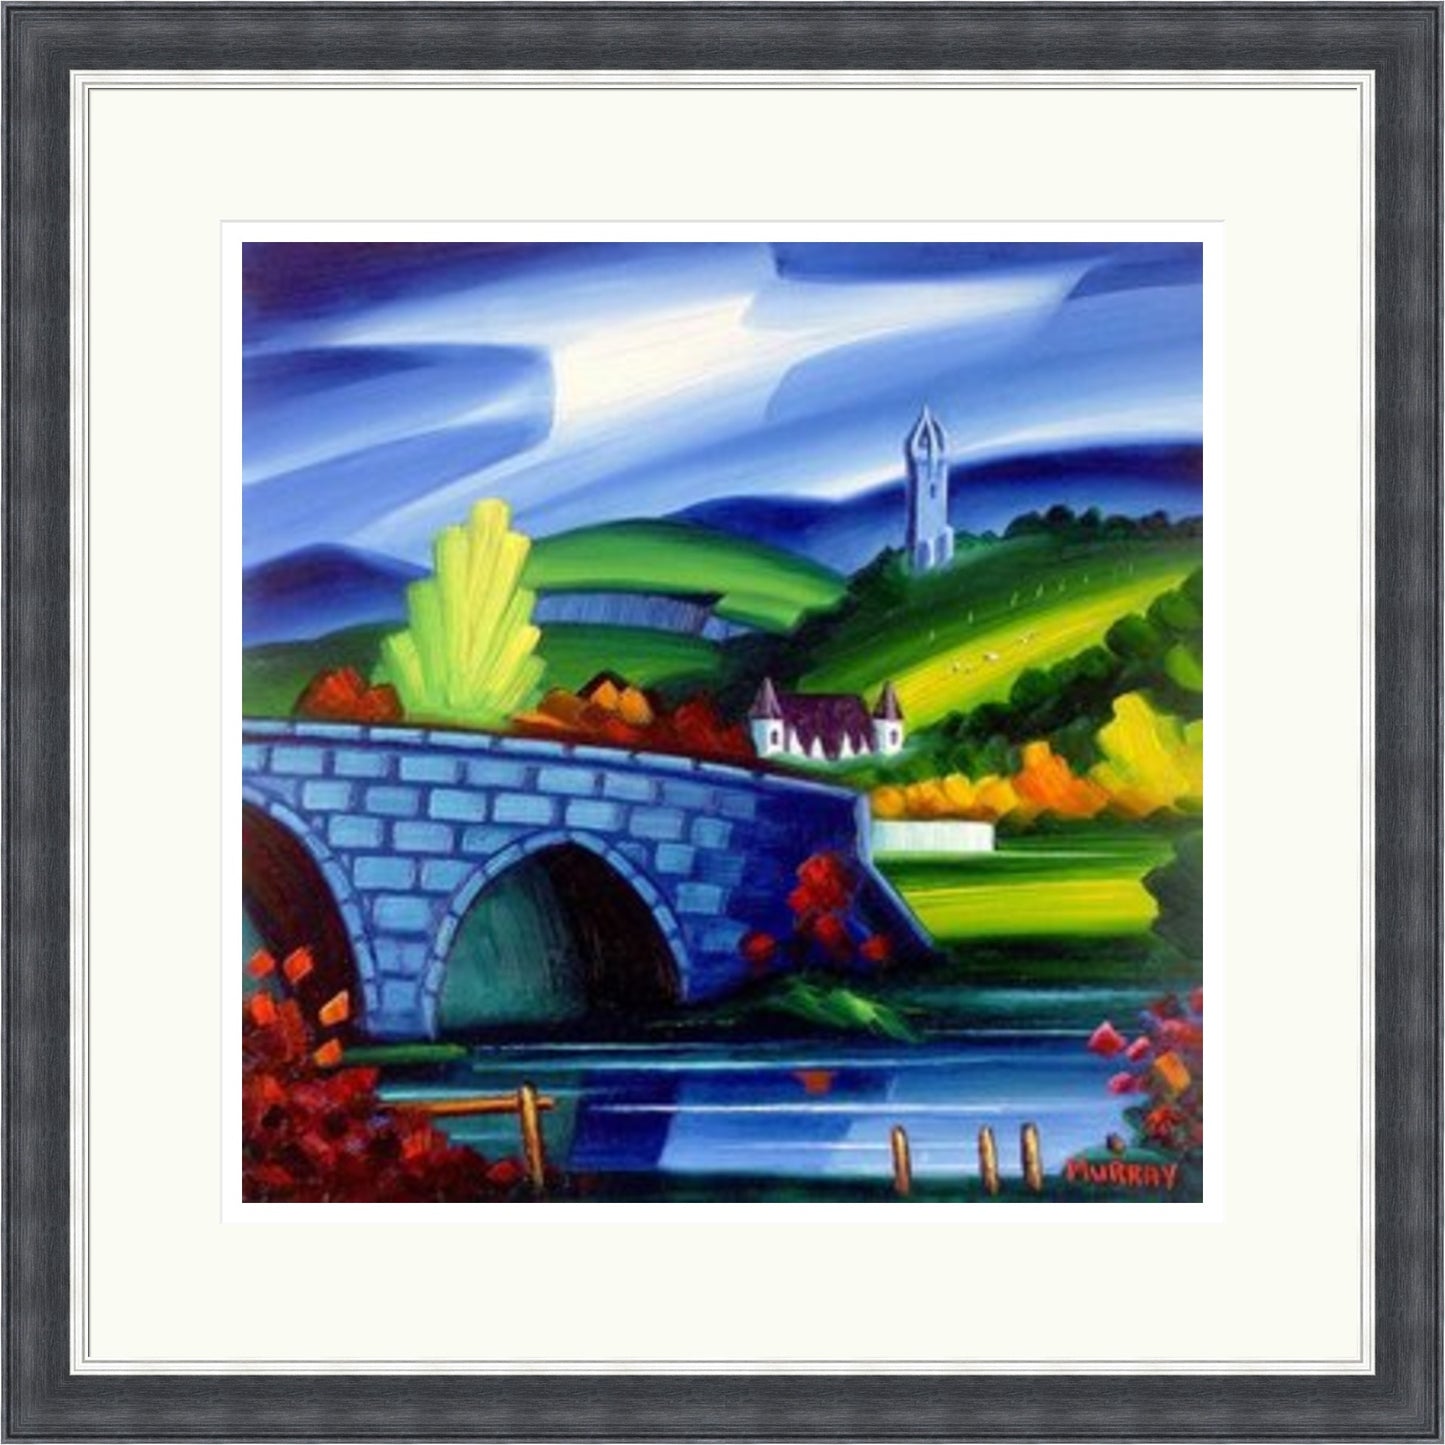 Stirling Bridge and Wallace Monument by Raymond Murray